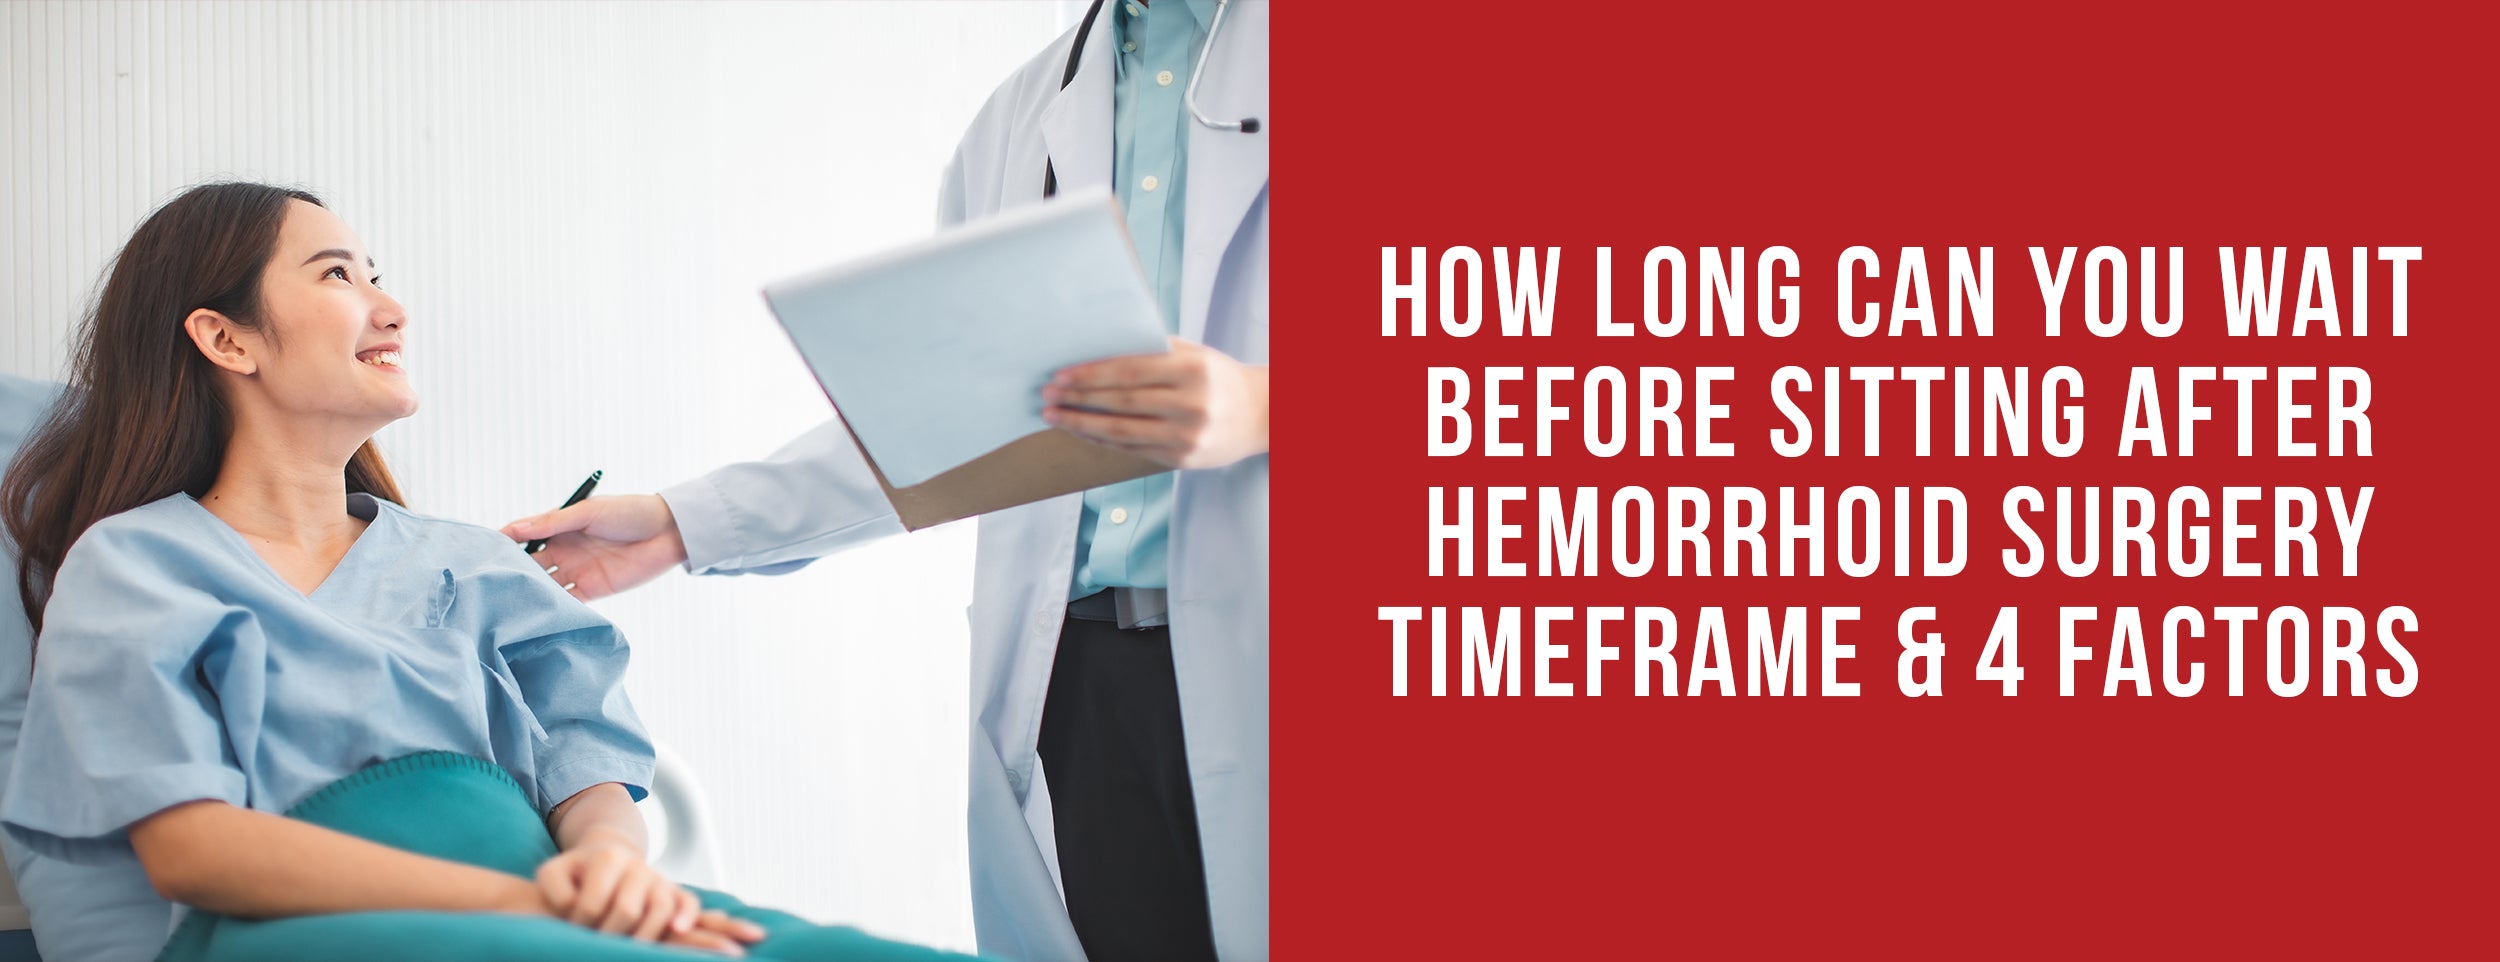 Considering 4 factors before sitting after hemorrhoid surgery